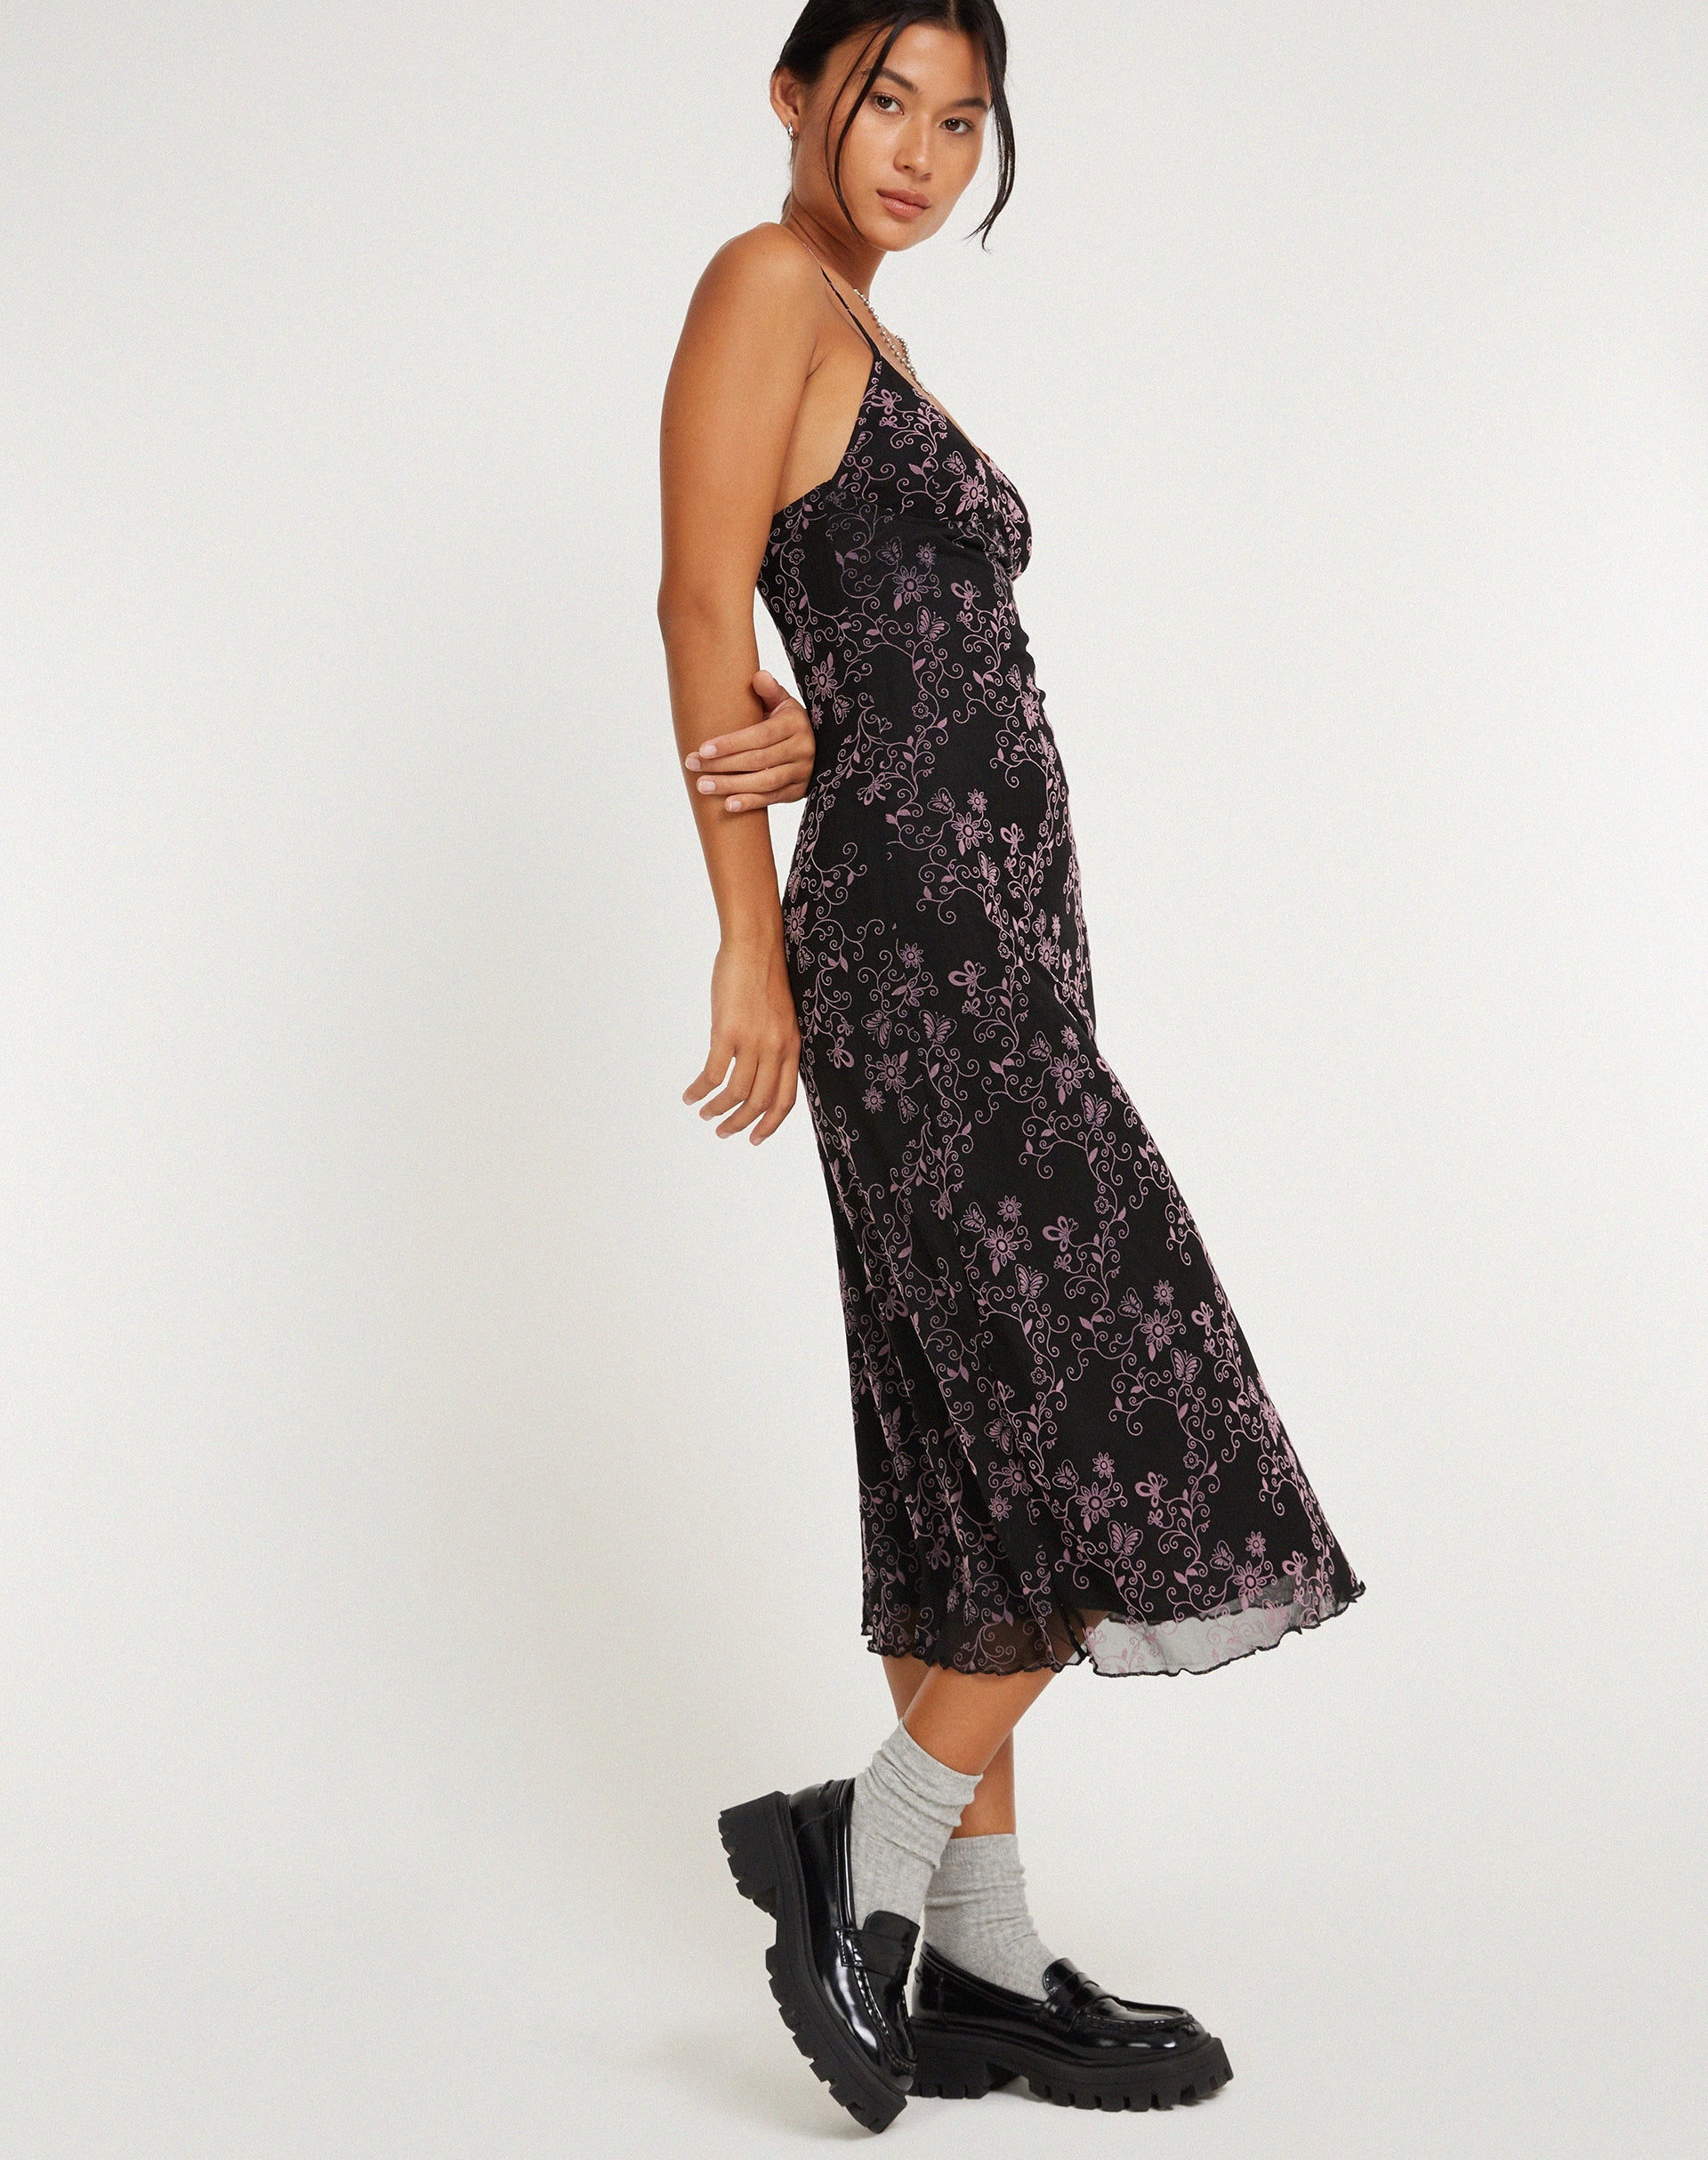 image of Cotina Midi Dress in Butterfly Vine Flock Black and Pink